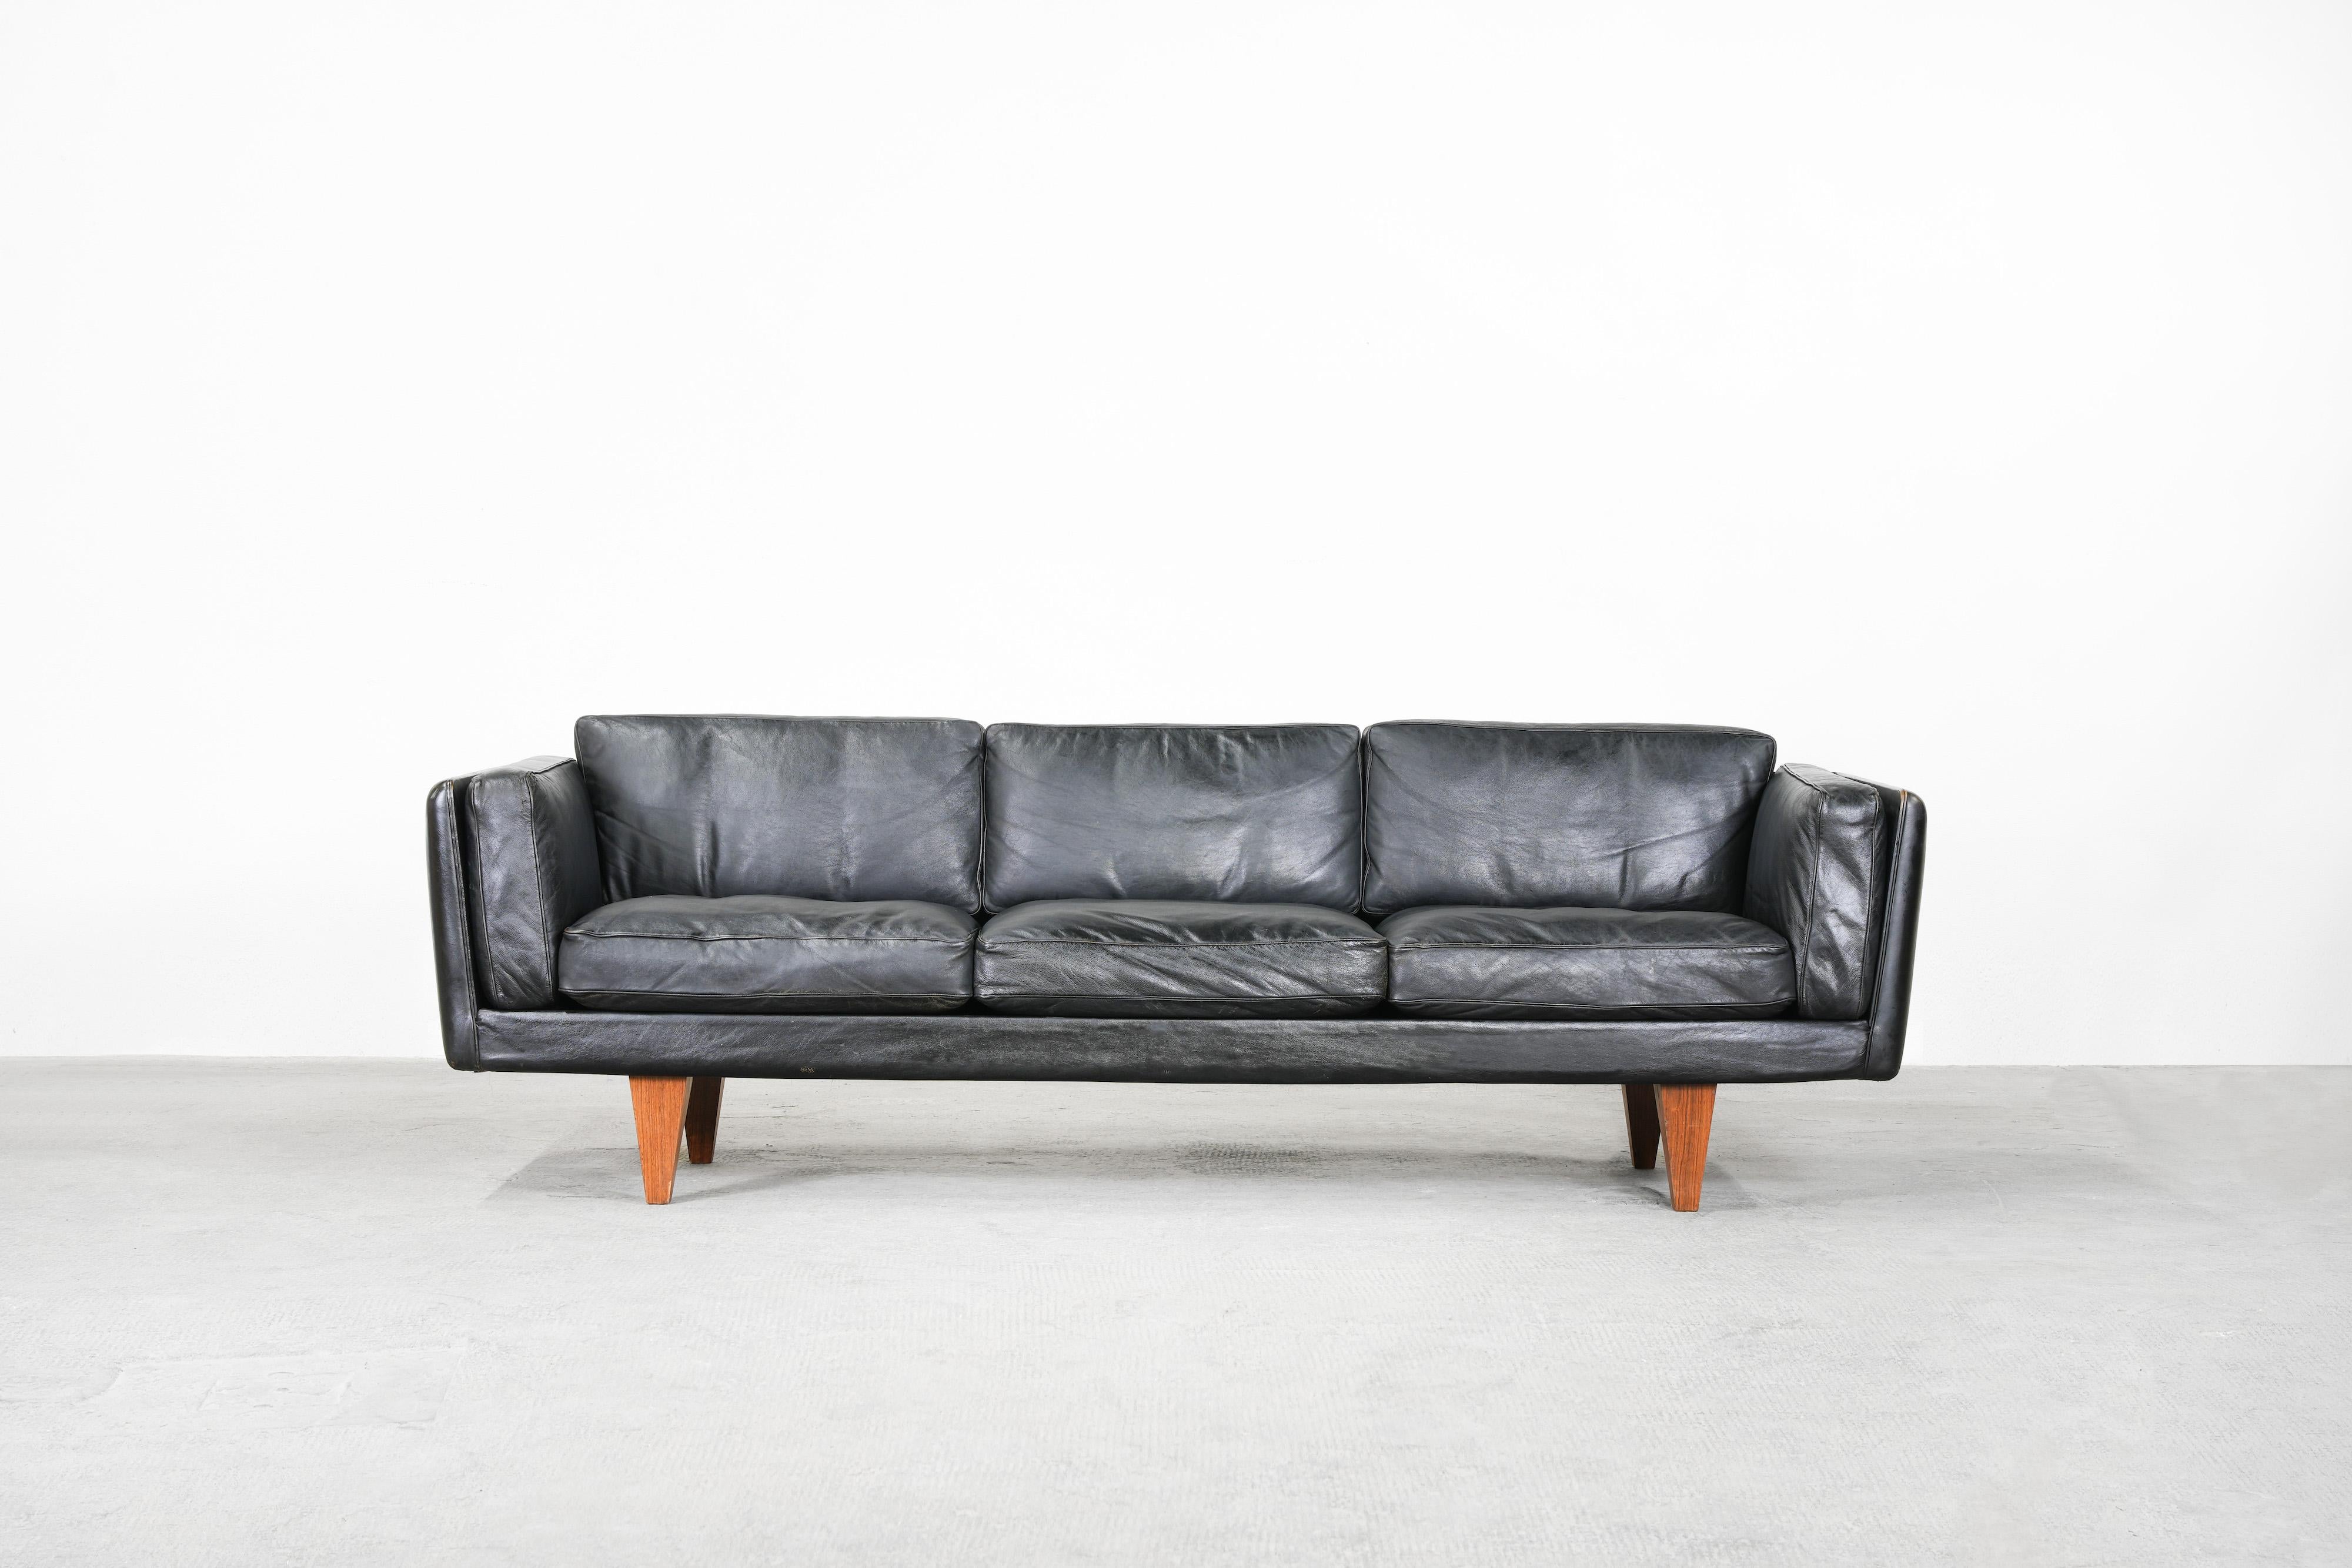 Beautiful Danish sofa designed by Illum Wikkelsø and manufactured by Holger Christiansen in the 1960ies.
The sofa comes in black patinated leather and is in great original condition with just a few traces of usage. The down feathers inside the